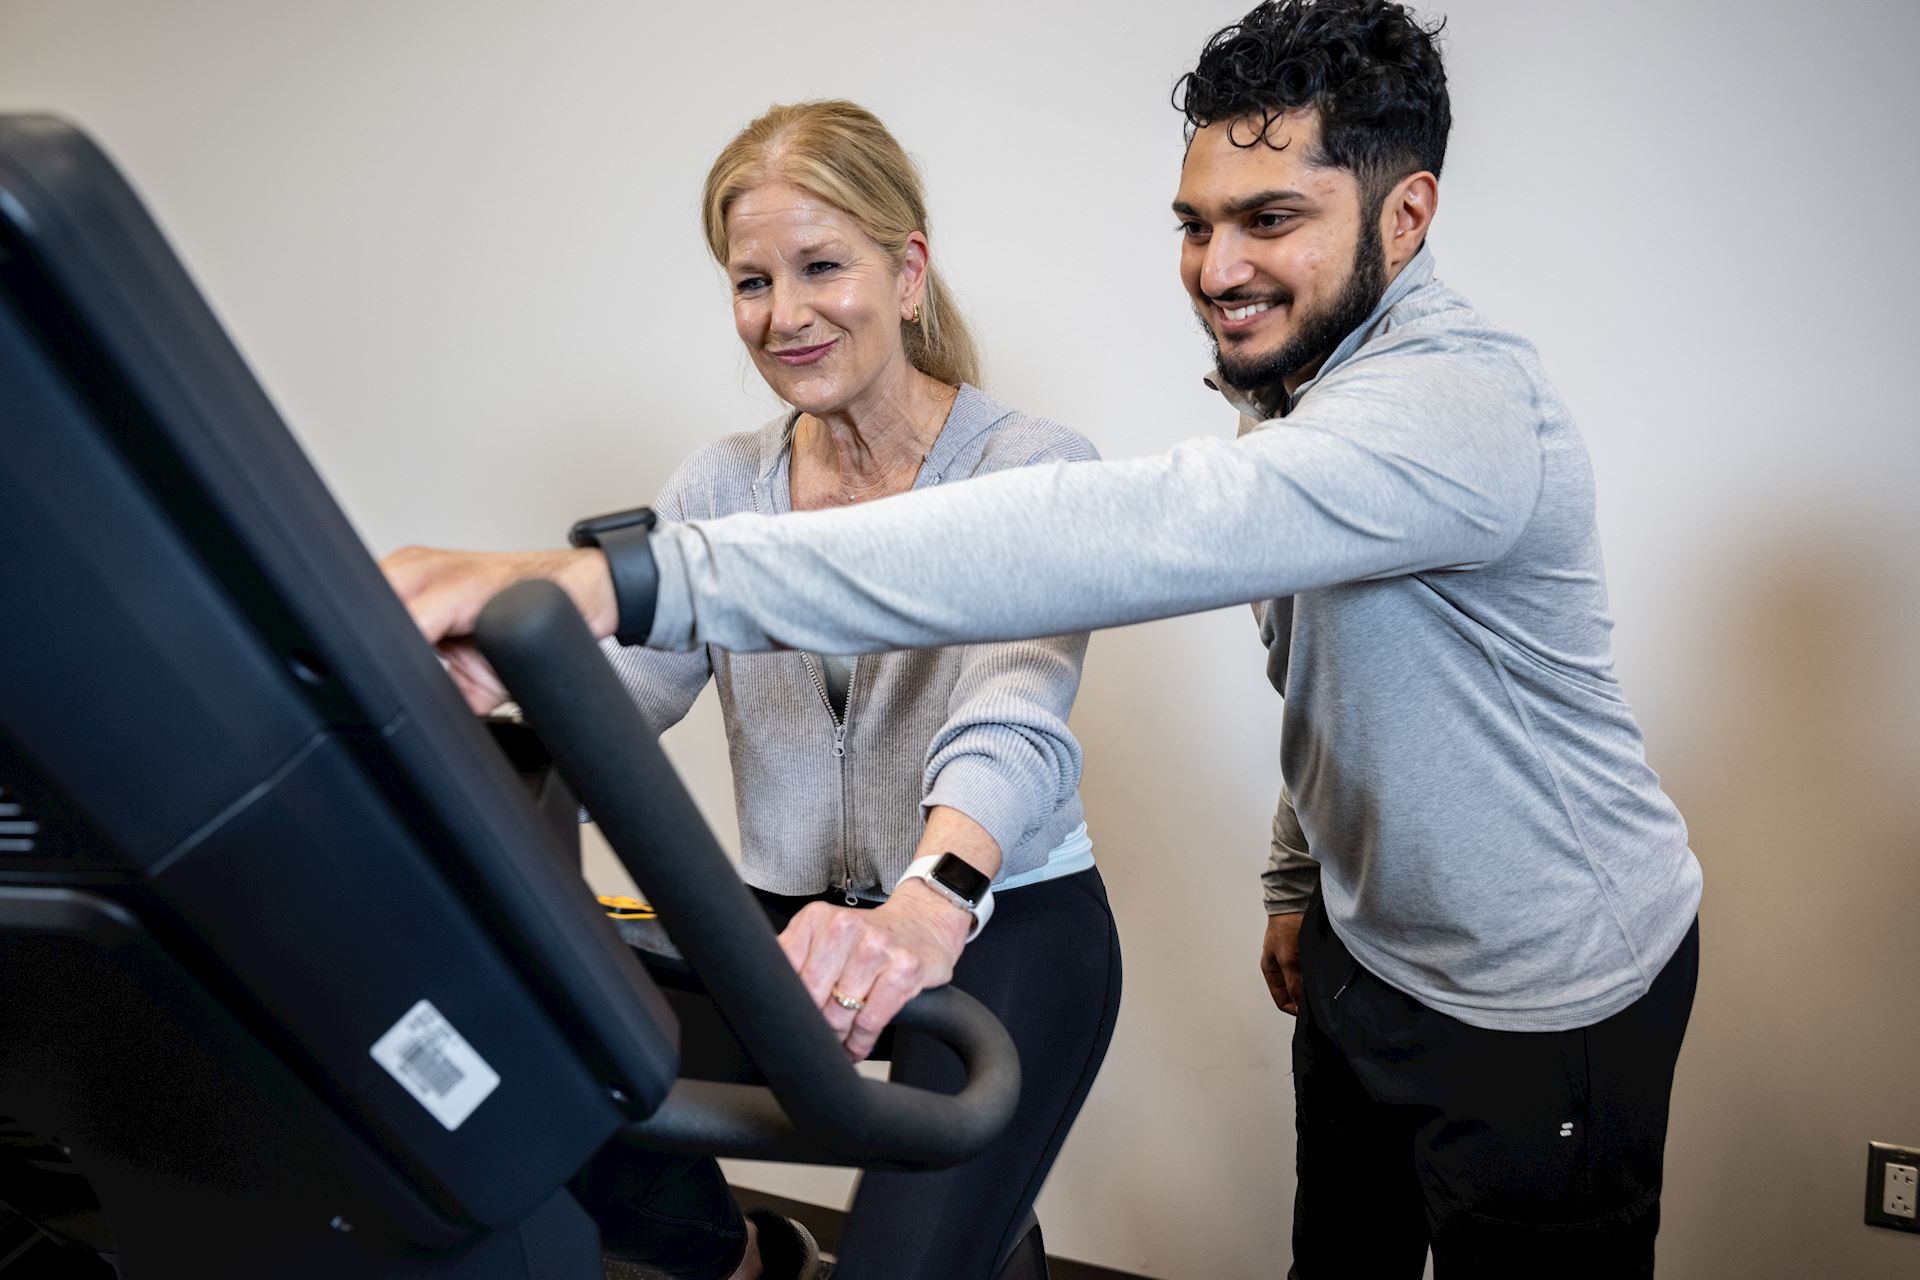 physical therapist assisting patient on stationary bike